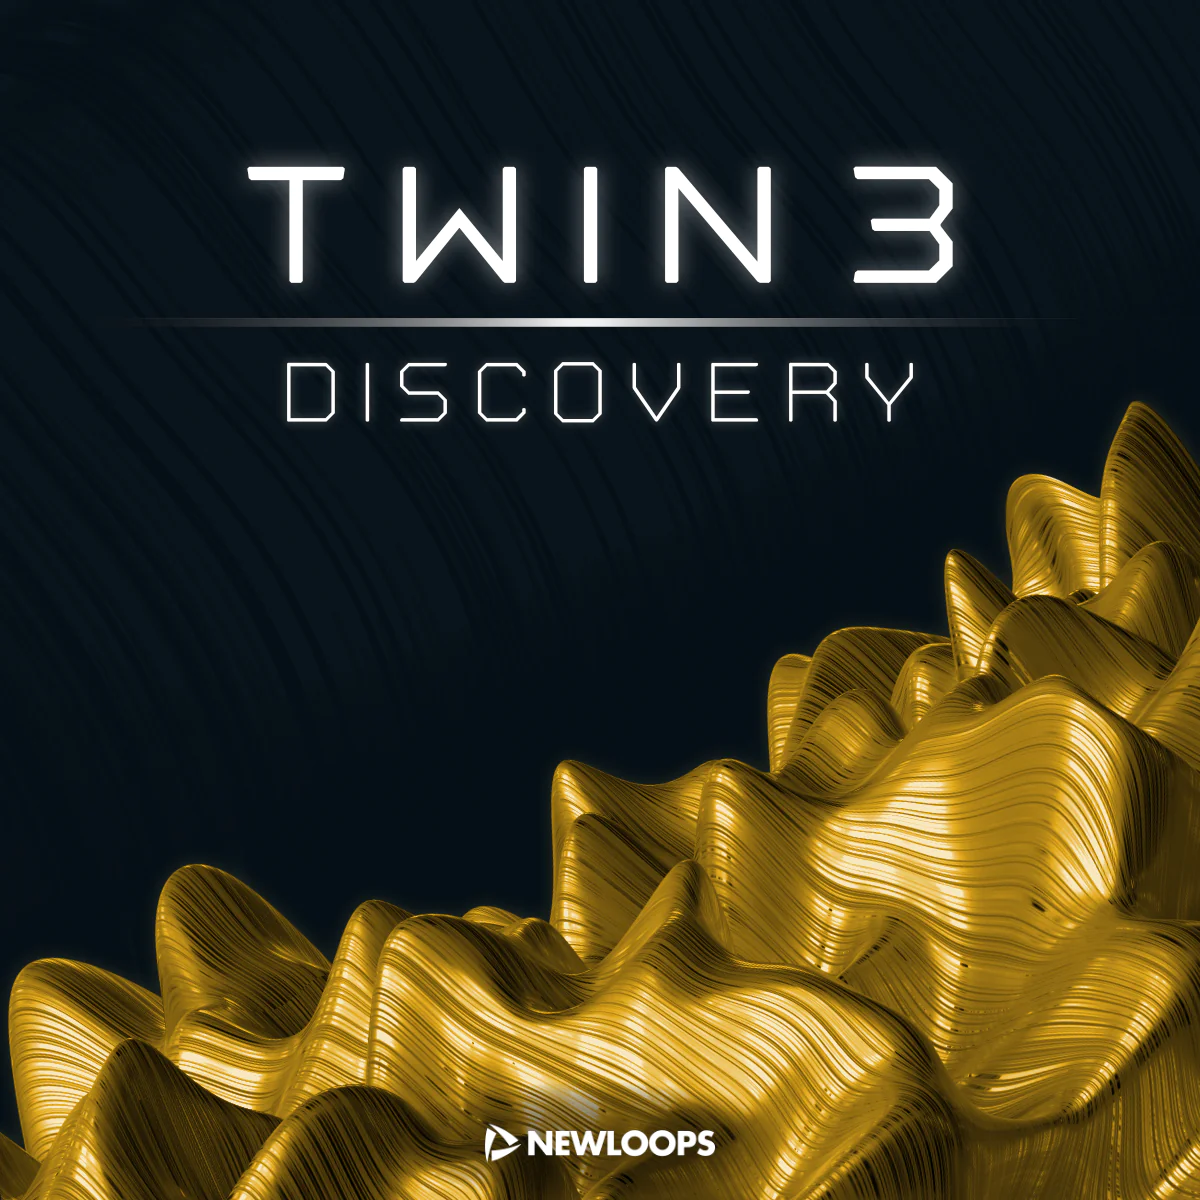  Twin 3 Discovery - Twin 3 Presets 